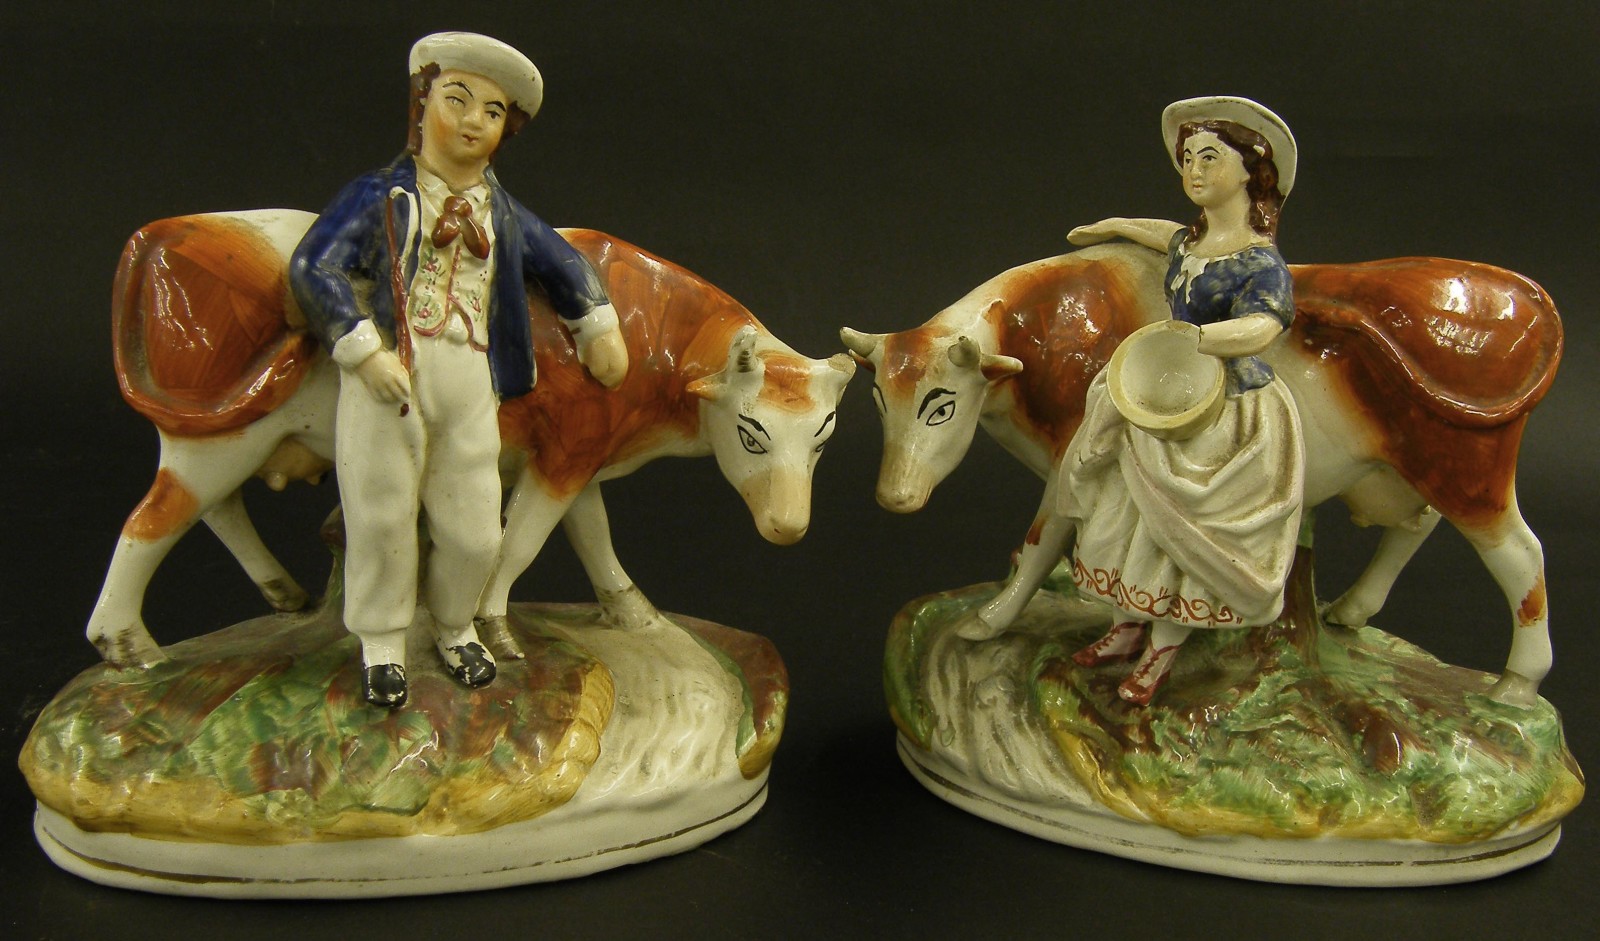 Pair of Victorian Staffordshire groups, modelled as a farmer and his partner with cattle, 9" high (